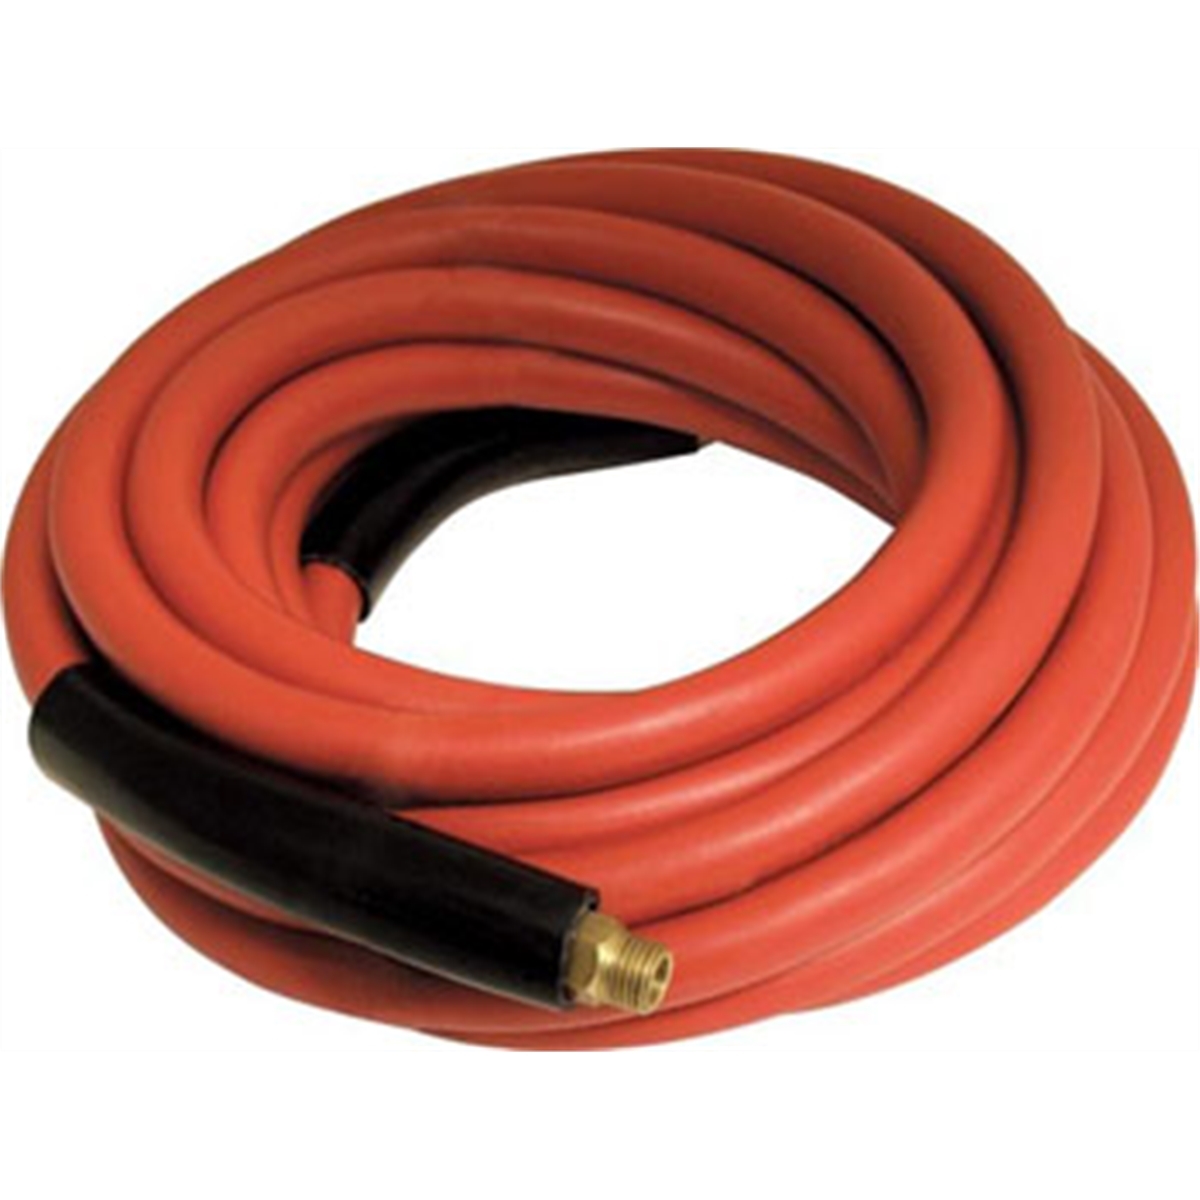 3/8 X 50 REINFORCED DOMESTIC AIR HOSE 325 PSI 1/4